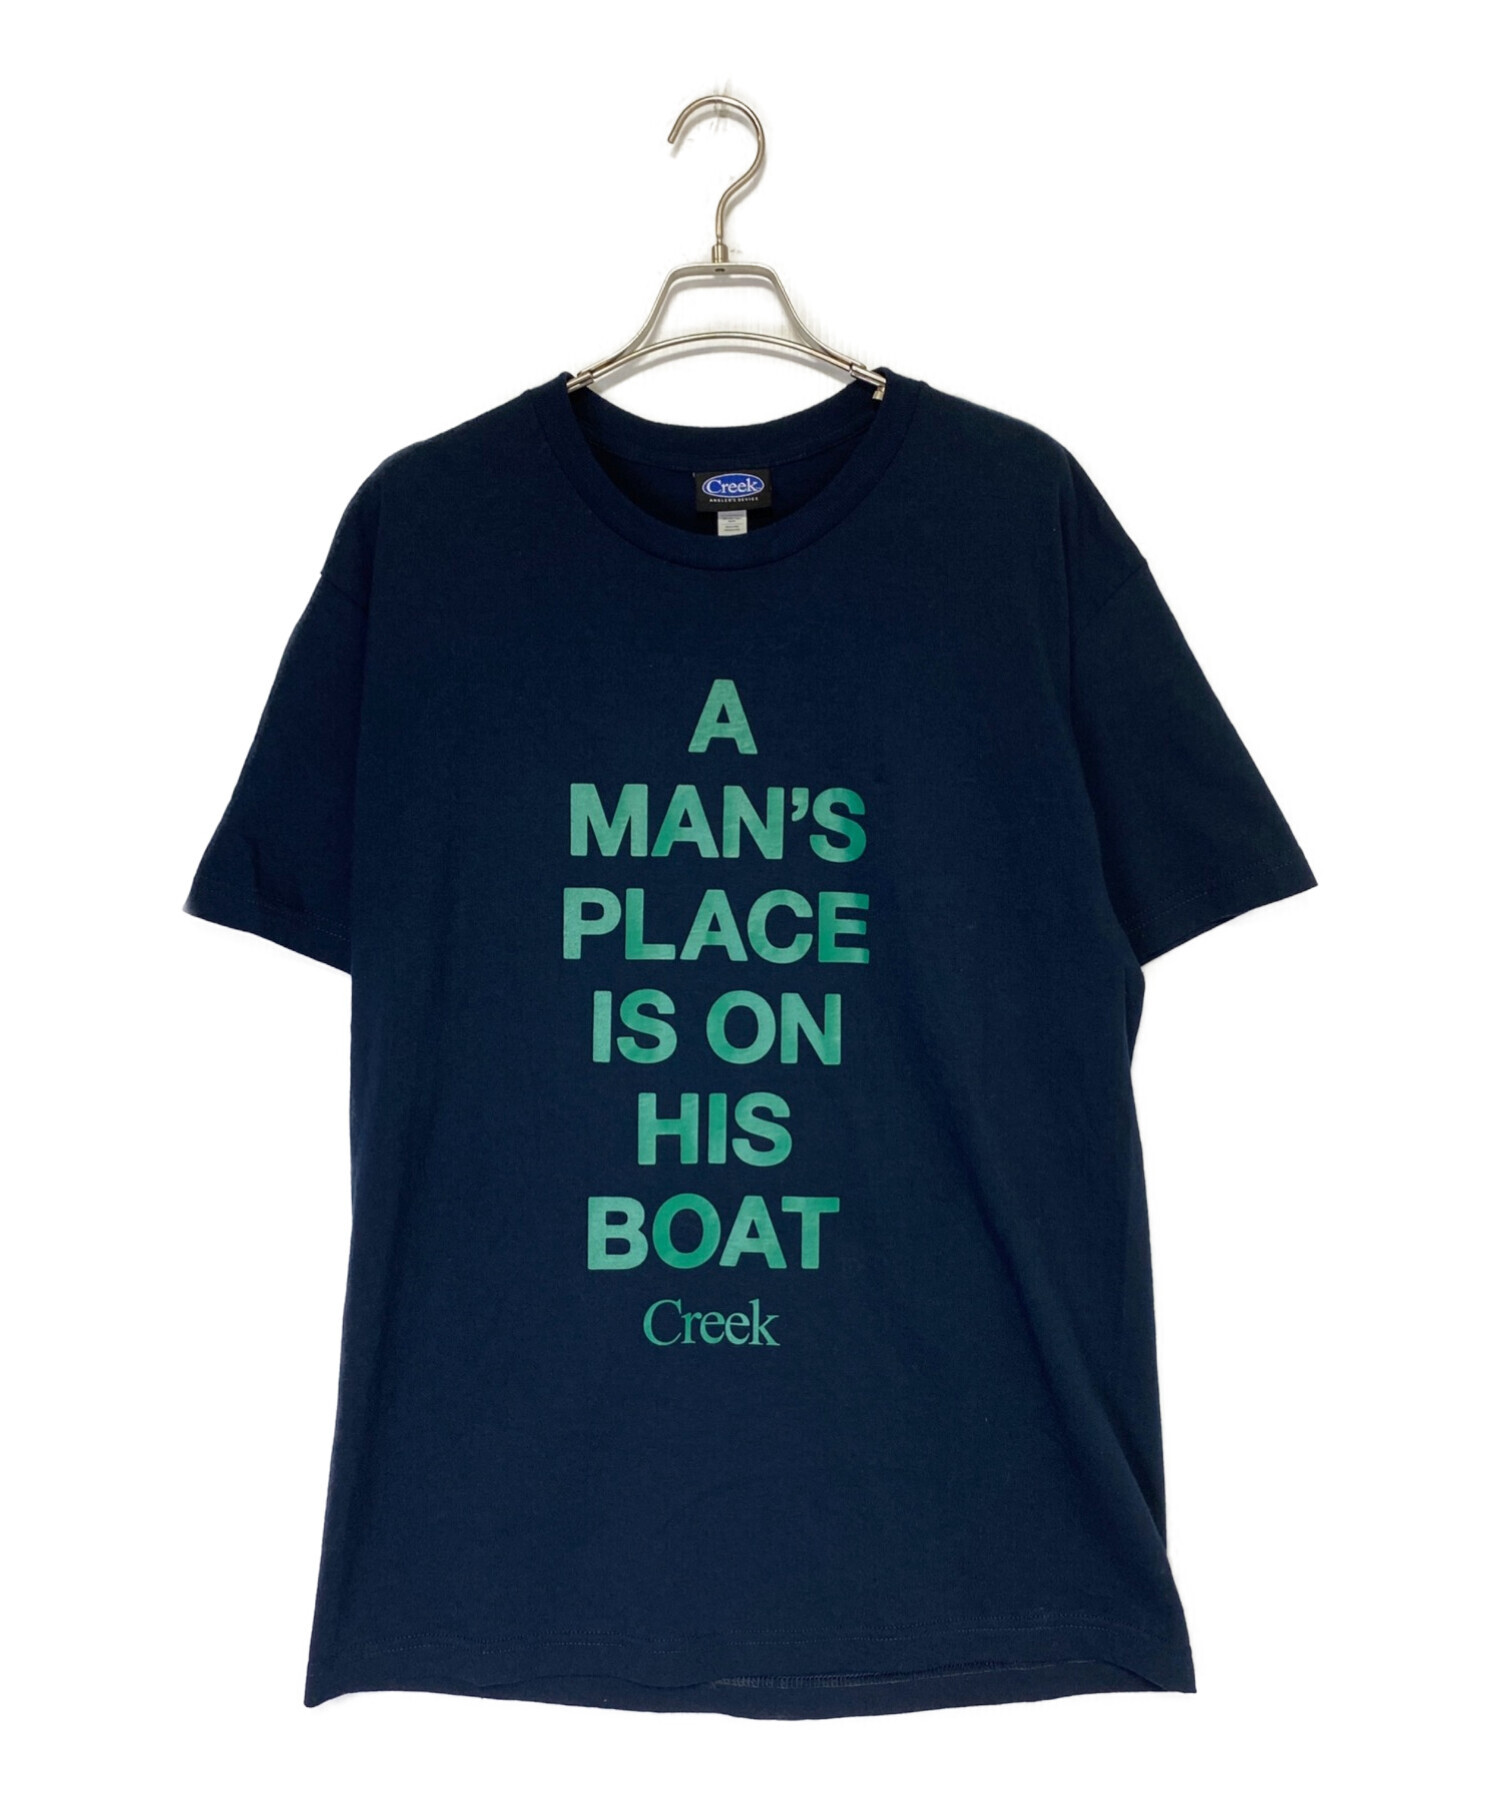 Creek Angler's Device On The Lake L tee - Tシャツ/カットソー(半袖 